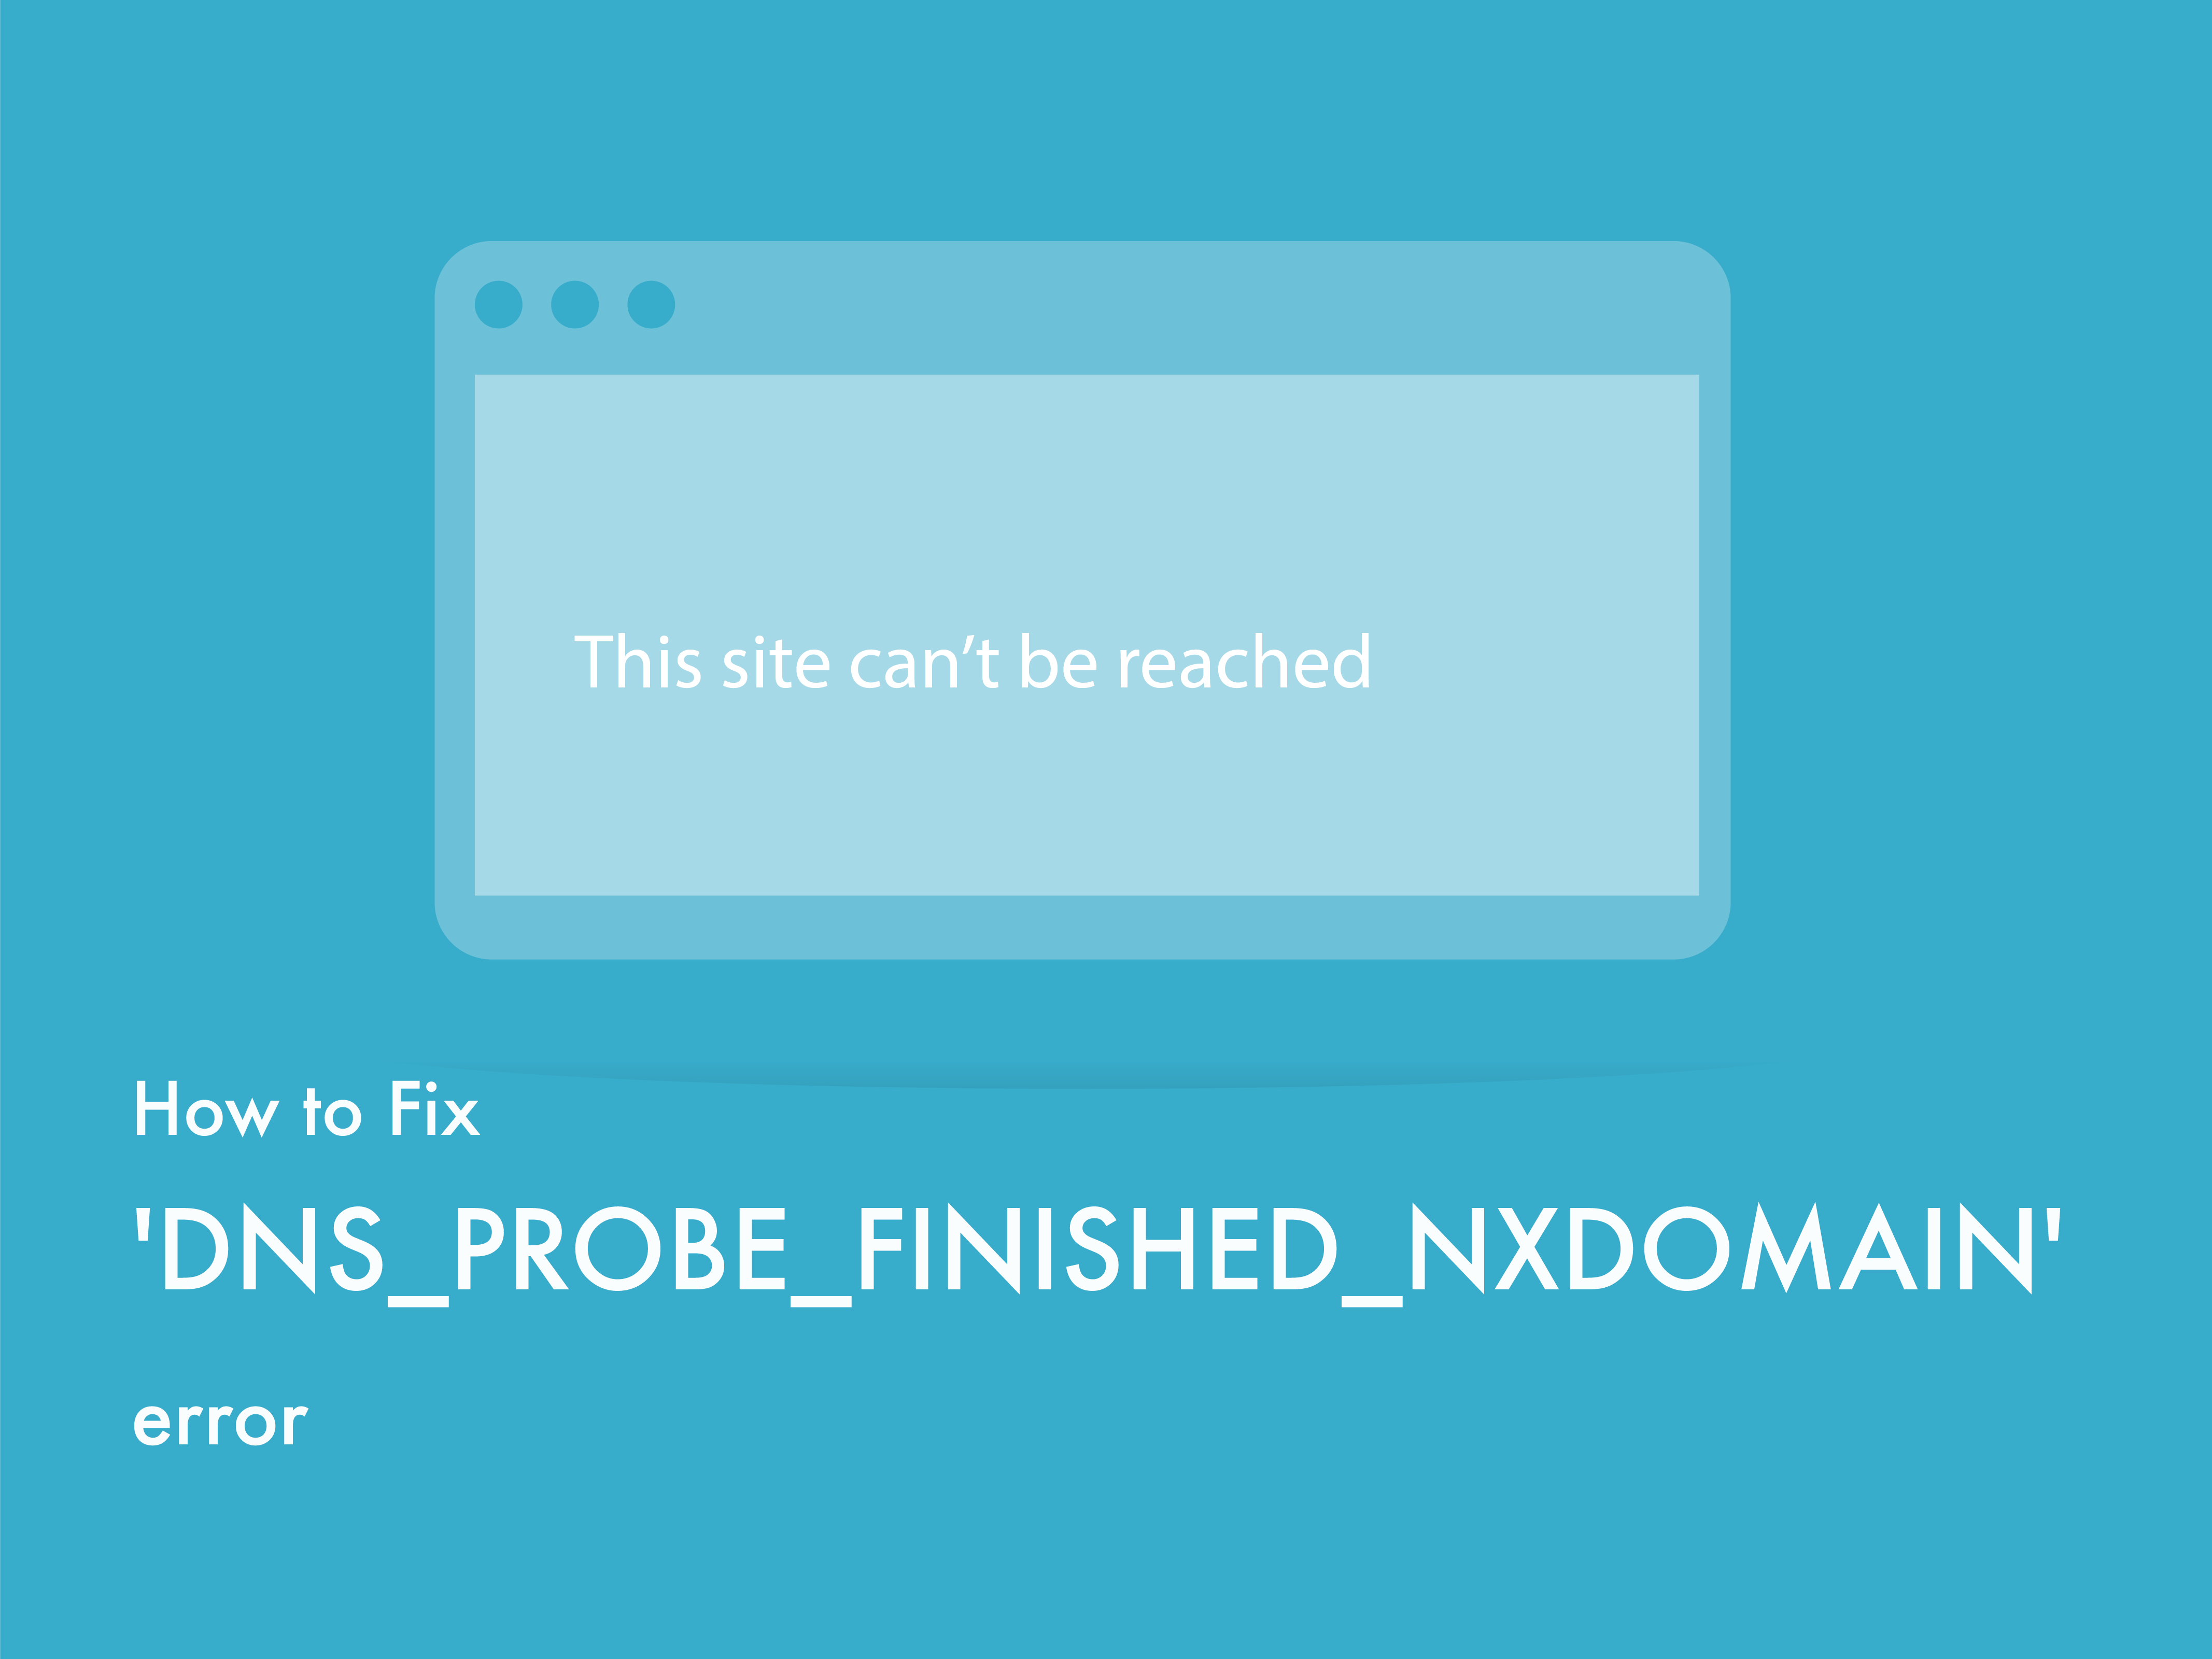 how to solve dns_probe_finished_nxdomain problem